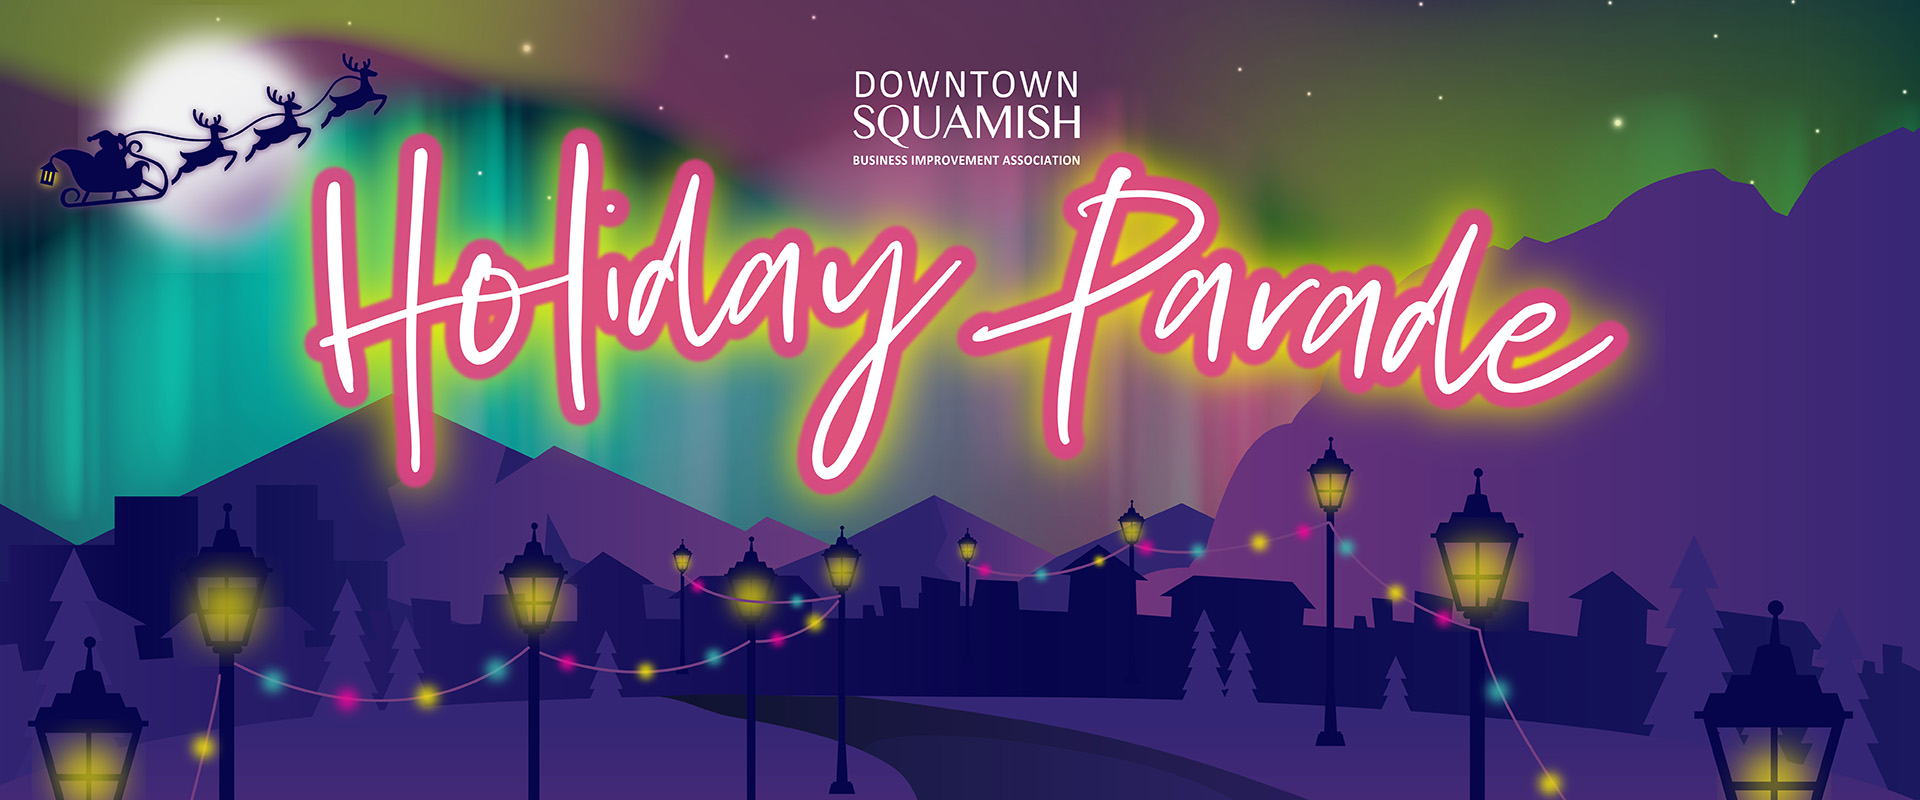 https://www.downtownsquamish.com/wp-content/uploads/2022/10/HP_Cover_.jpg